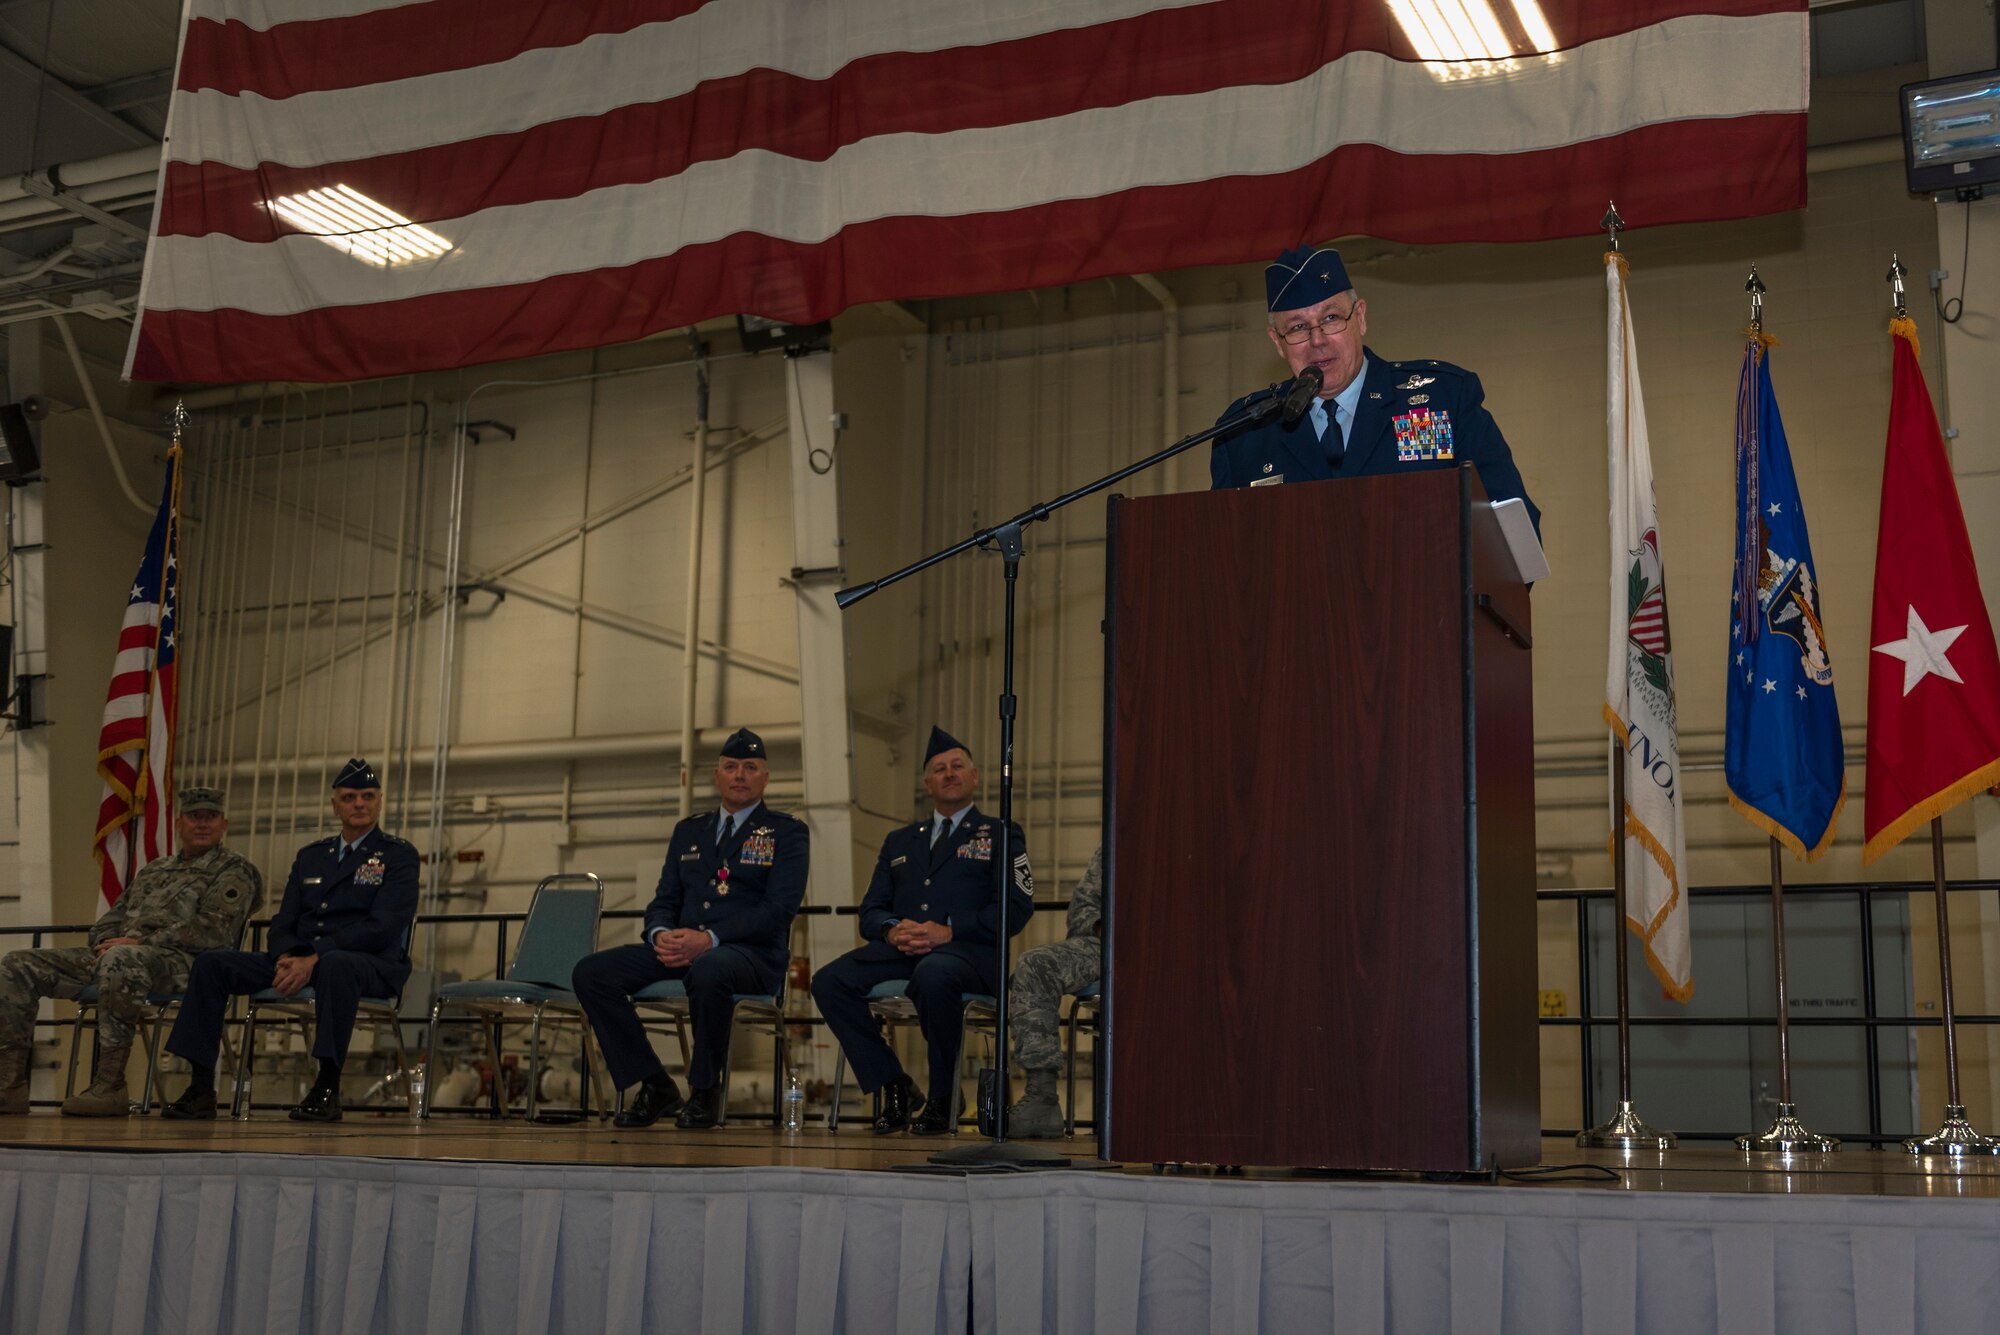 U.S. Air Force Brig. Gen. William Robertson, the chief of staff for the Illinois Air National Guard, speaks to the 182nd Airlift Wing at the conclusion of his change of command and promotion ceremony in Peoria, Ill., Nov. 4, 2017. Robertson commanded the wing for 13 years before being promoted to brigadier general and relinquishing command to Col. Daniel McDonough at the ceremony. (U.S. Air National Guard photo by Tech. Sgt. Lealan Buehrer)